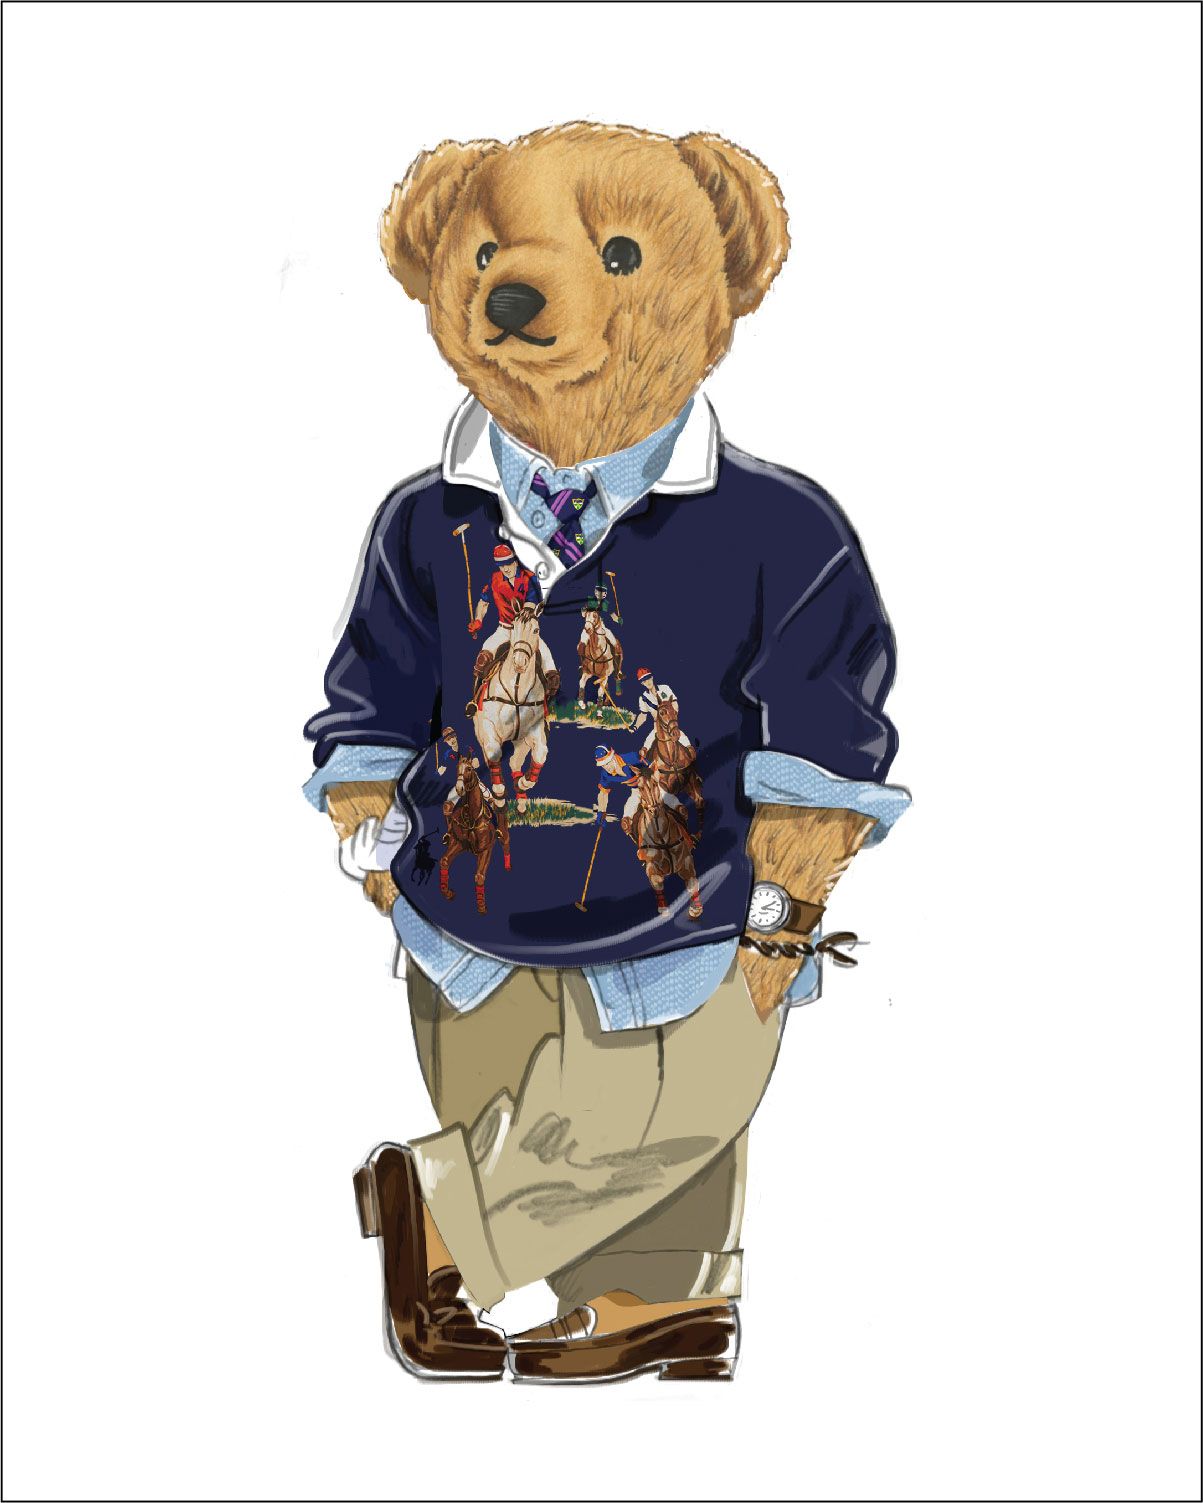 Our beloved #PoloBear appears in our latest men's collection, sporting a  look that is quintessential #PoloRalphLauren. Discover more #Po